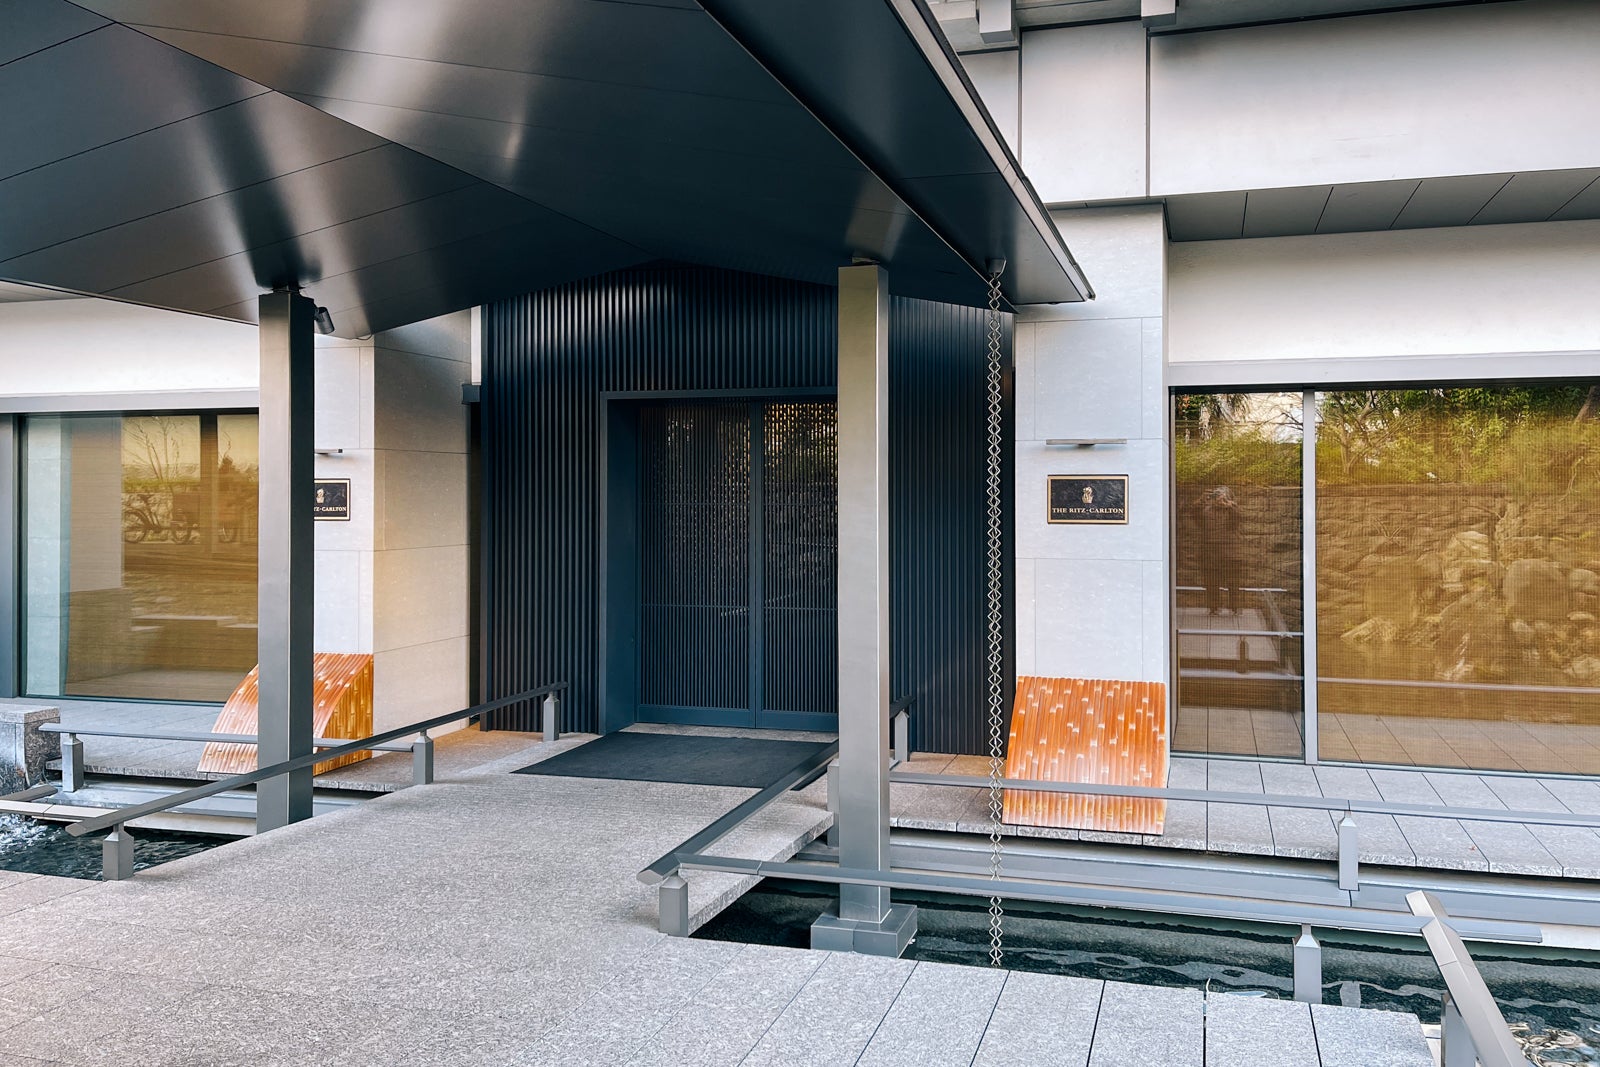 Entrance for The Ritz-Carlton, Kyoto in Japan